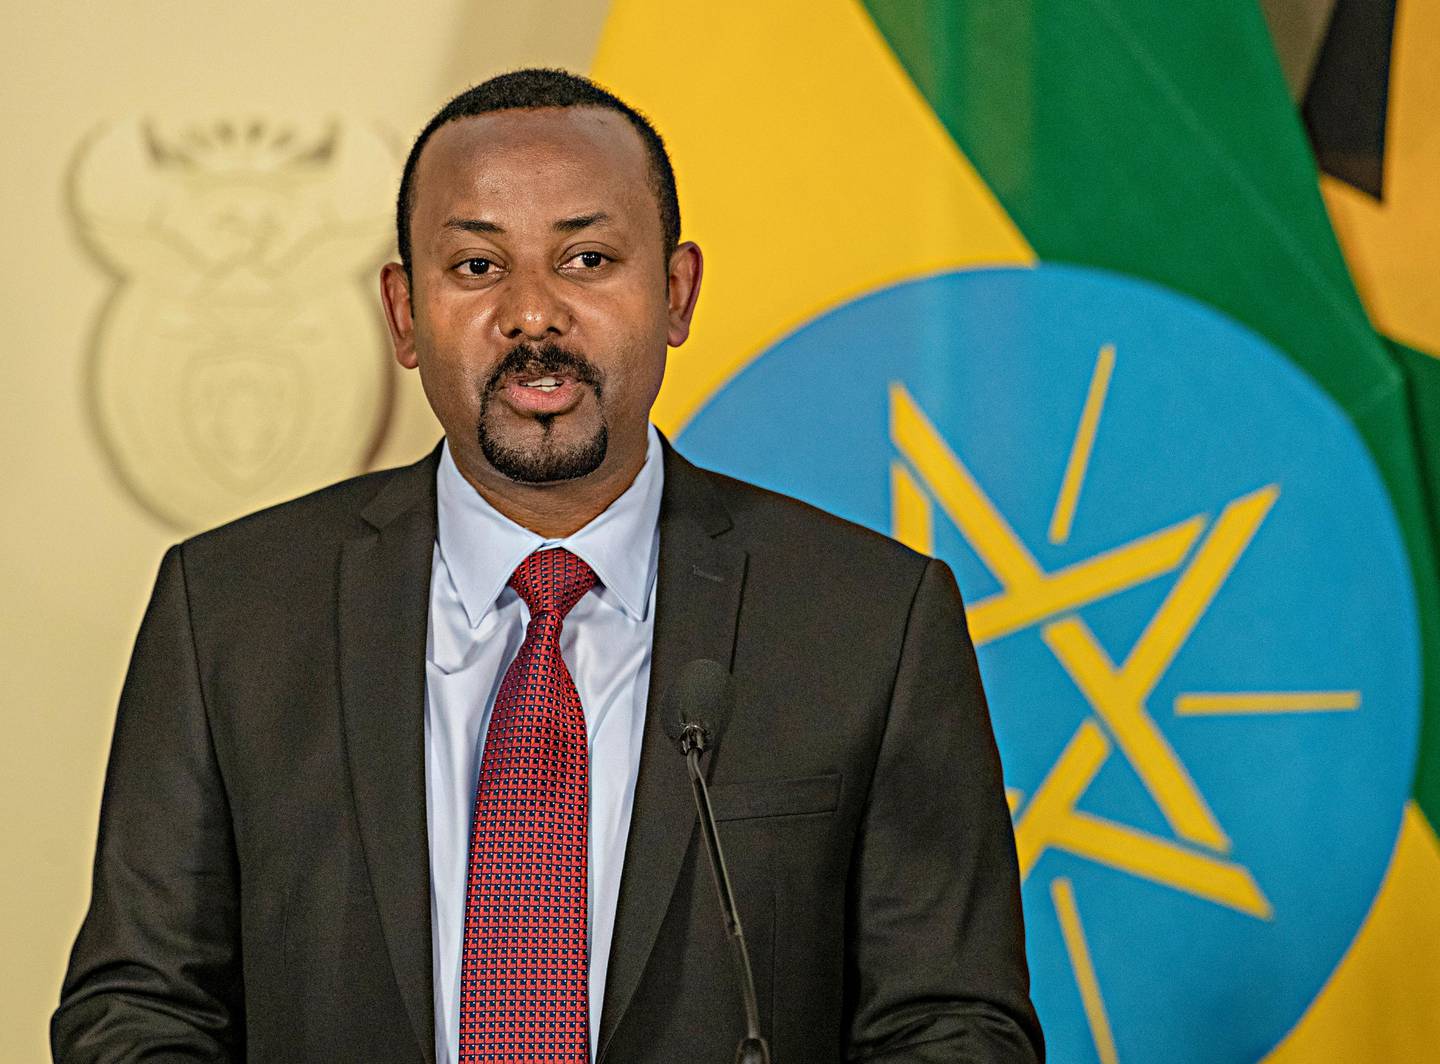 Ethiopia's Prime Minister Abiy Ahmed speaks during a joint media conference with South African President Cyril Ramaphosa after their talks at the Union Building in Pretoria, South Africa, Sunday, Jan. 12, 2020. (AP Photo/Themba Hadebe)